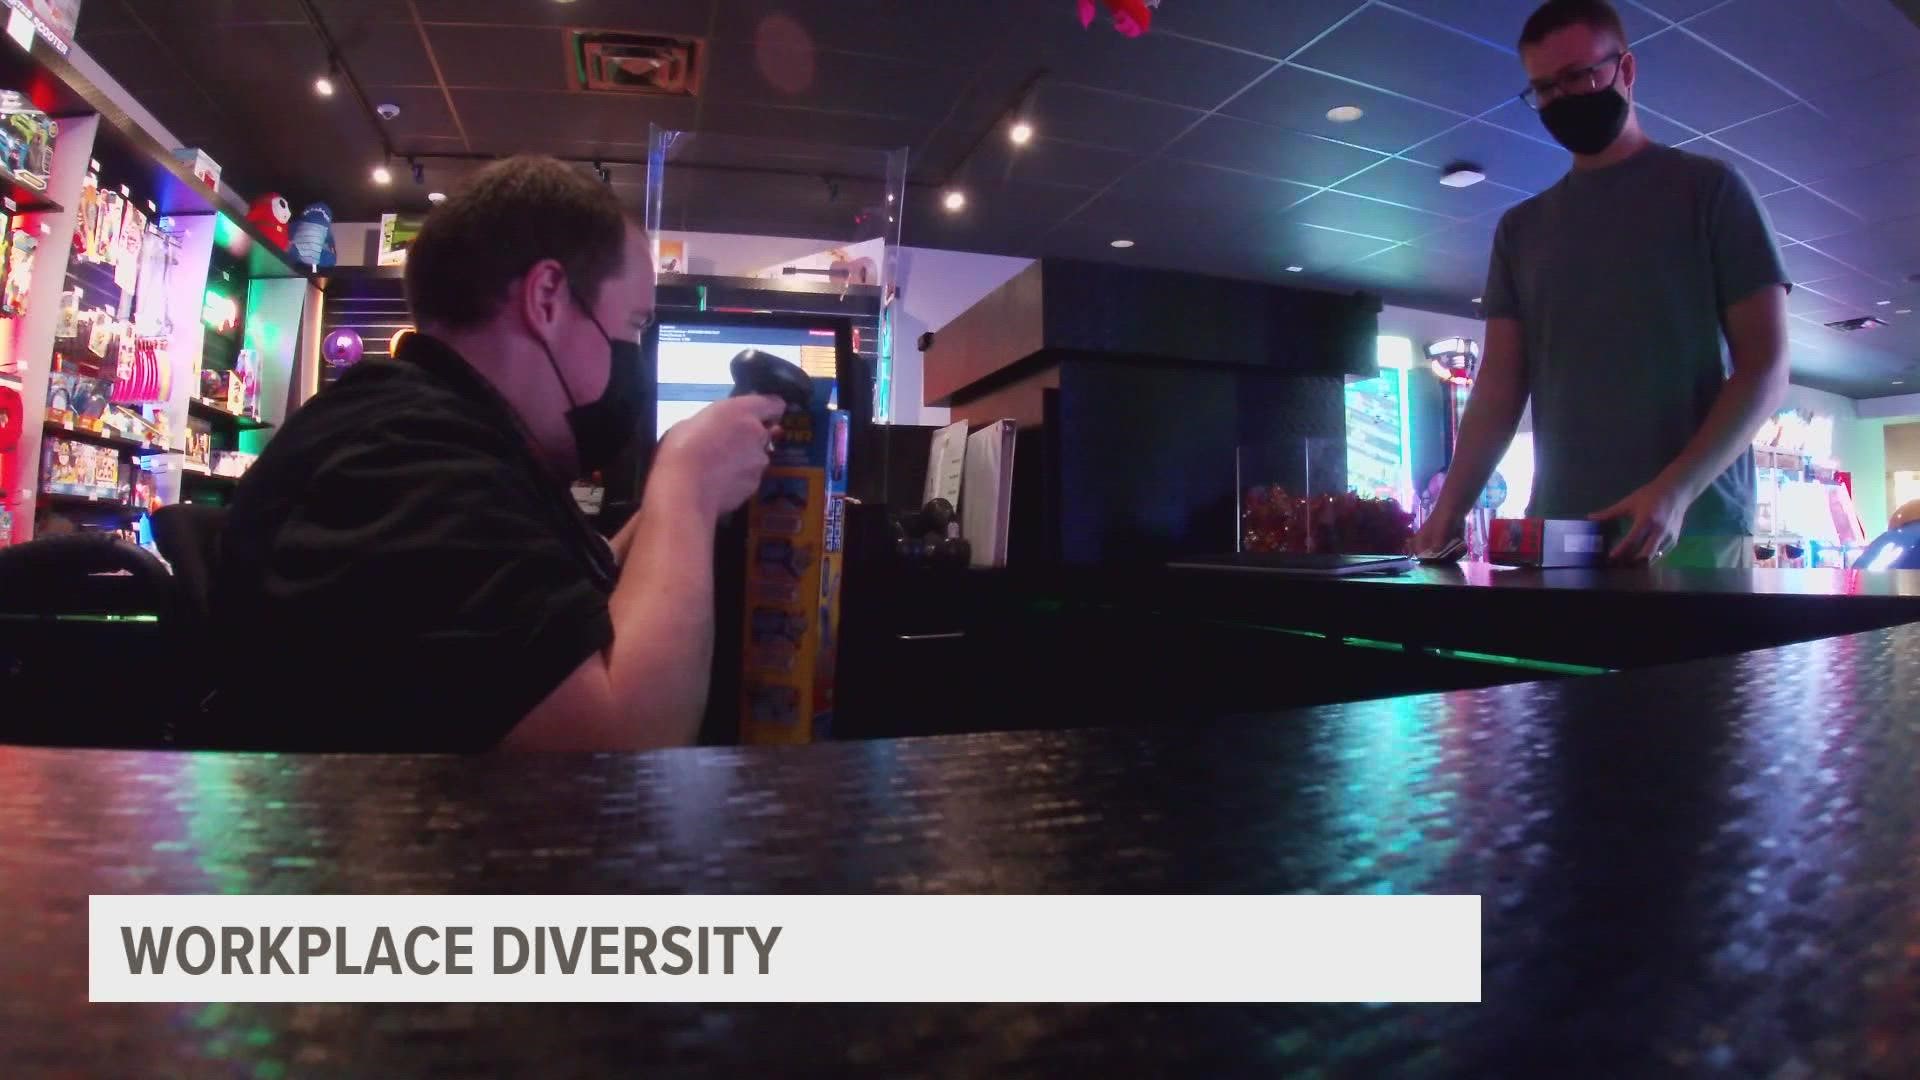 Nathan McDonald is an arcade attendant at B&B Theatres in Ankeny. He has cerebral palsy and talked about how Easterseals Iowa prepared him to enter the workforce.